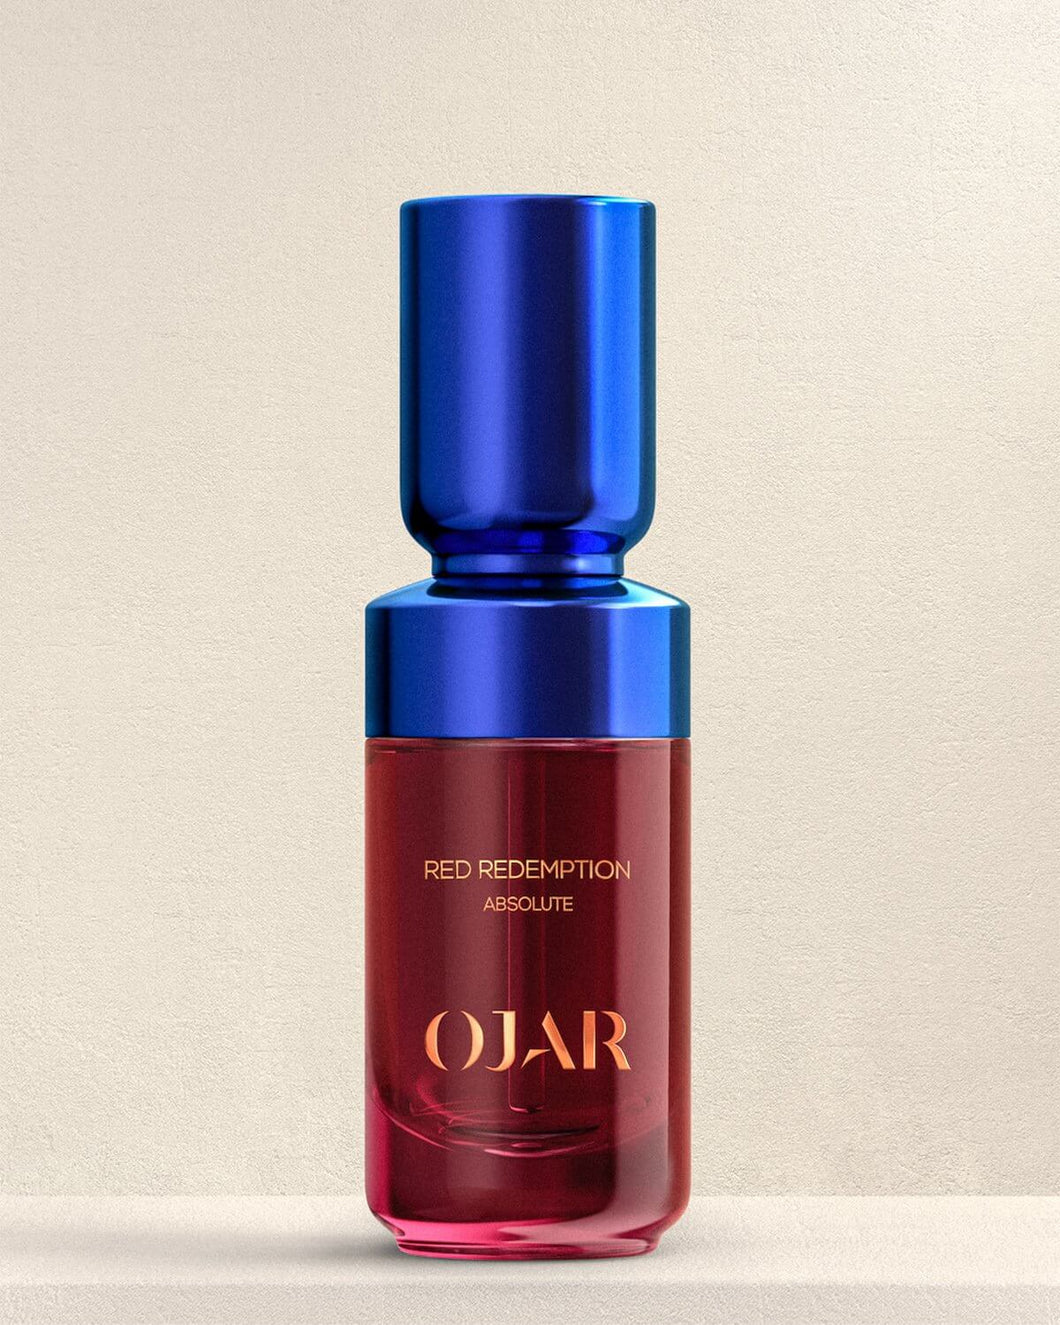 OJAR Absolute Red Redemption Perfume